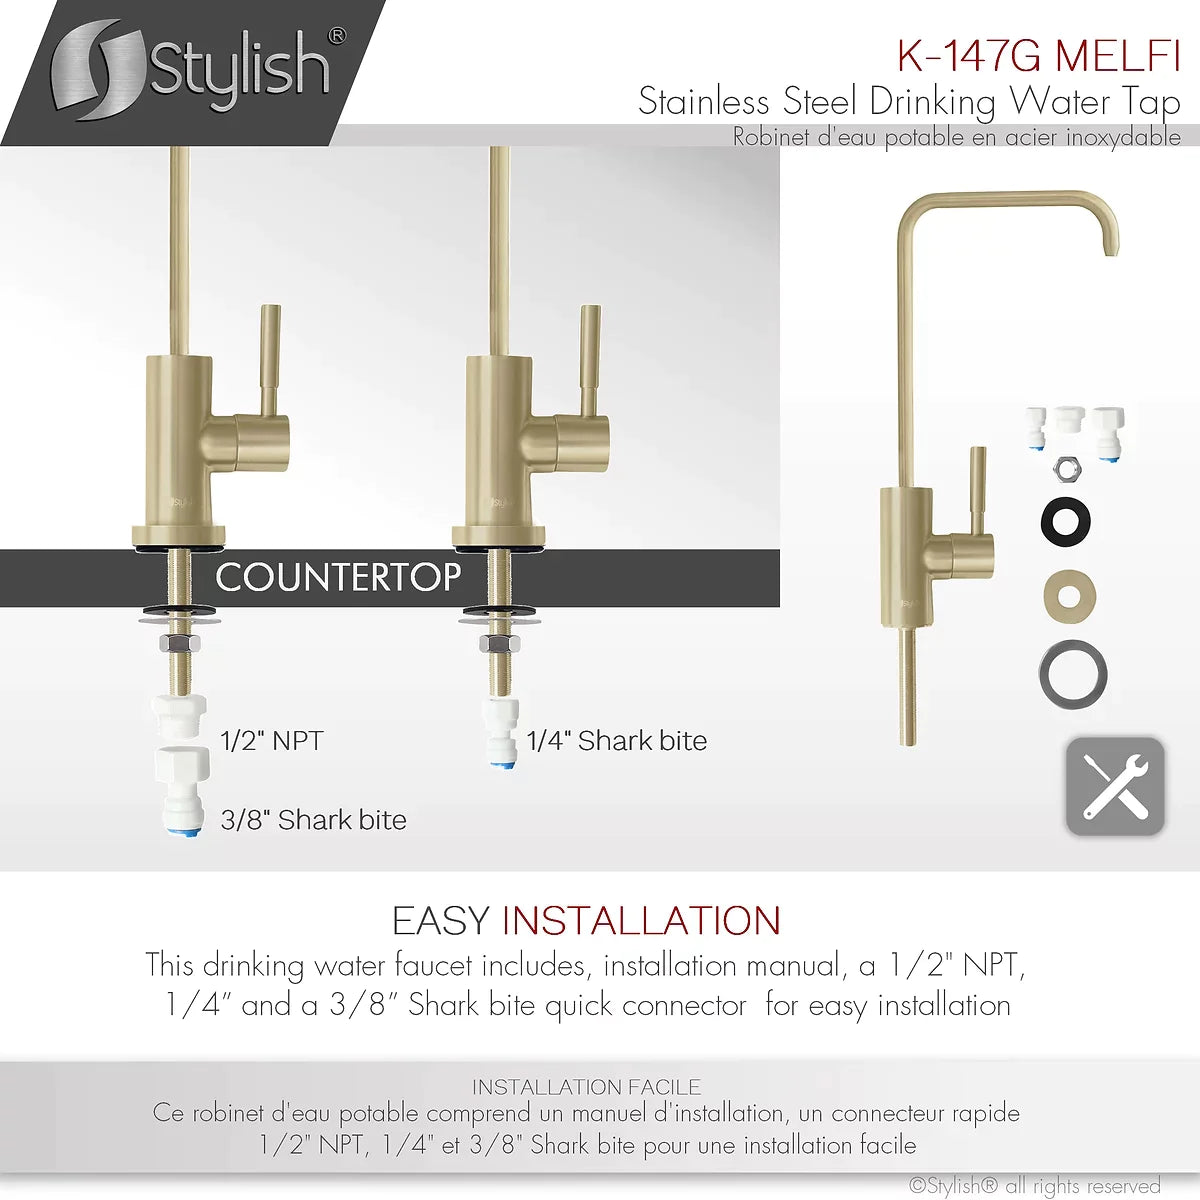 Stylish Melfi Single Handle Cold Water Tap Stainless Steel Brushed Gold Finish K-147G